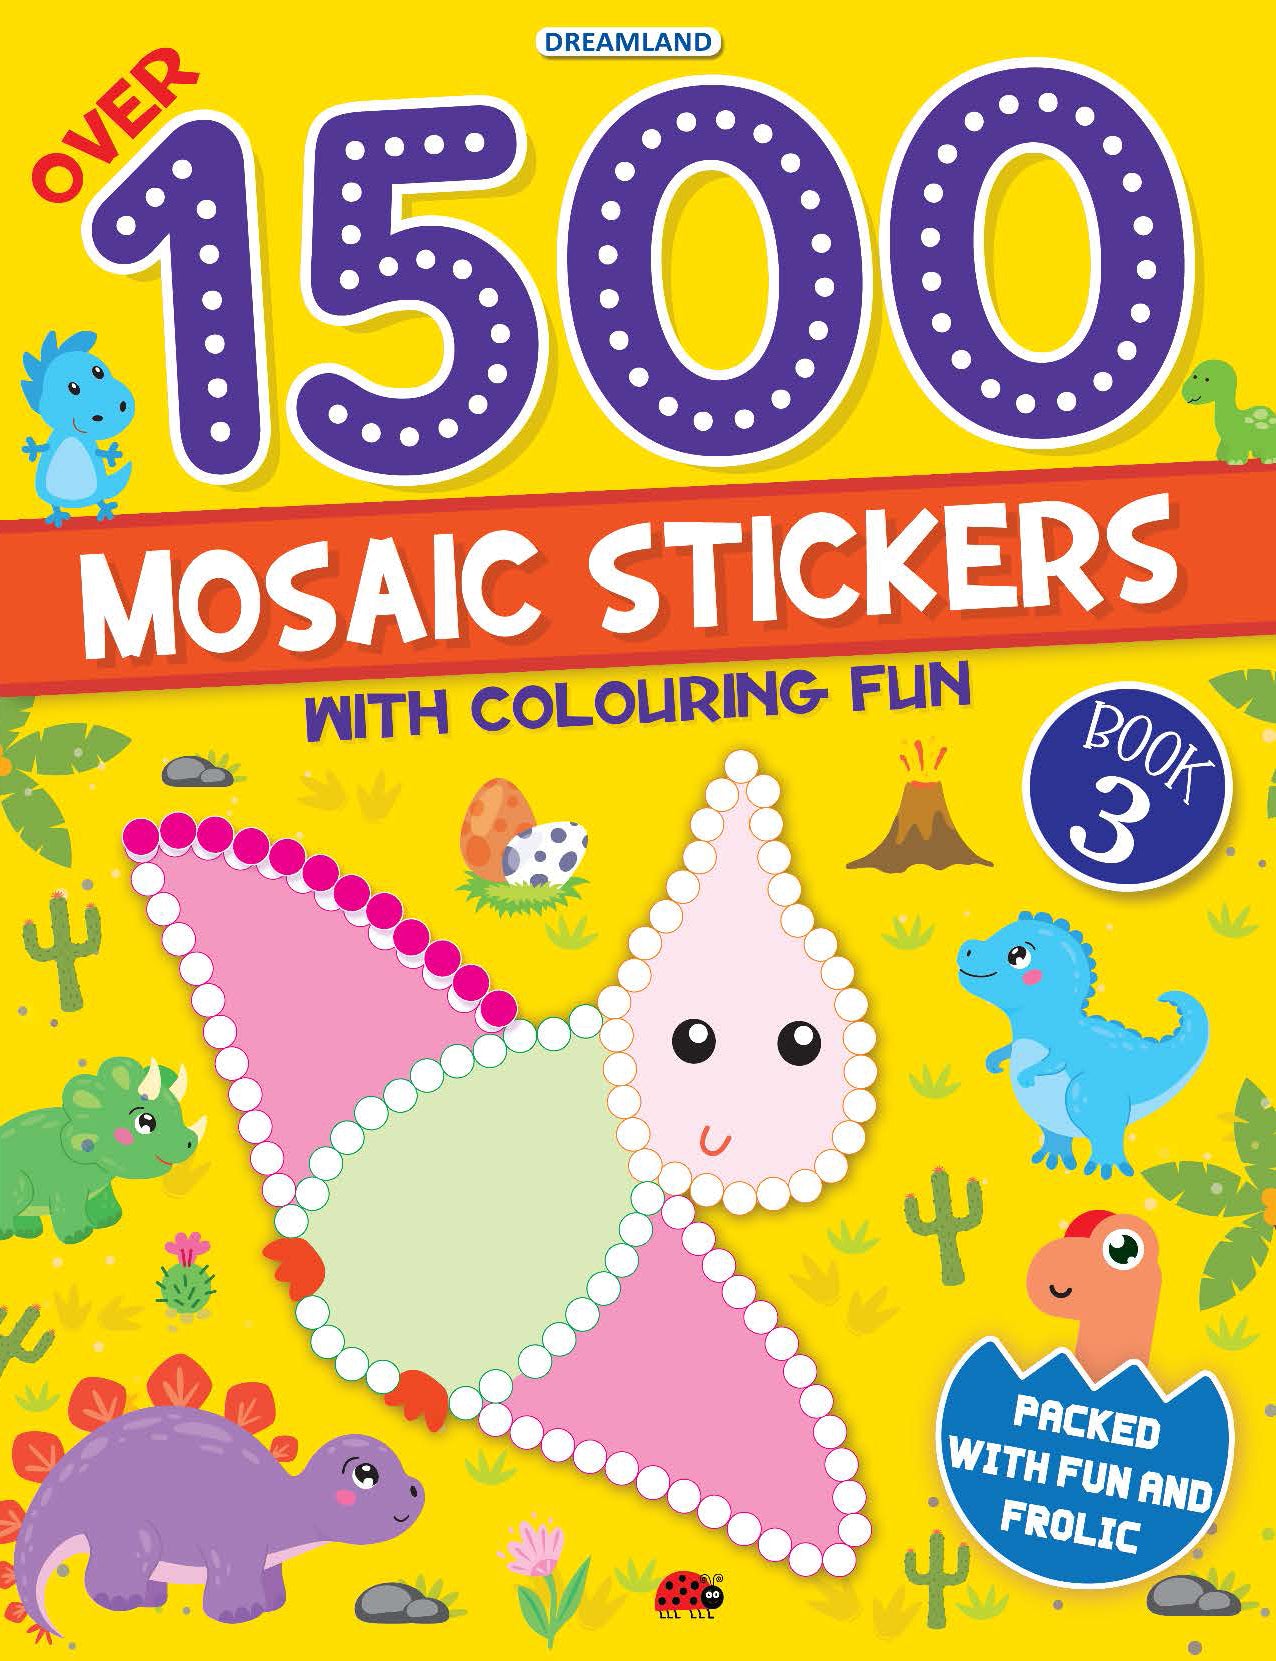 1500 Mosaic Stickers Book 3 with Colouring Fun  - Sticker Bok for Kids Age 4 - 8 years